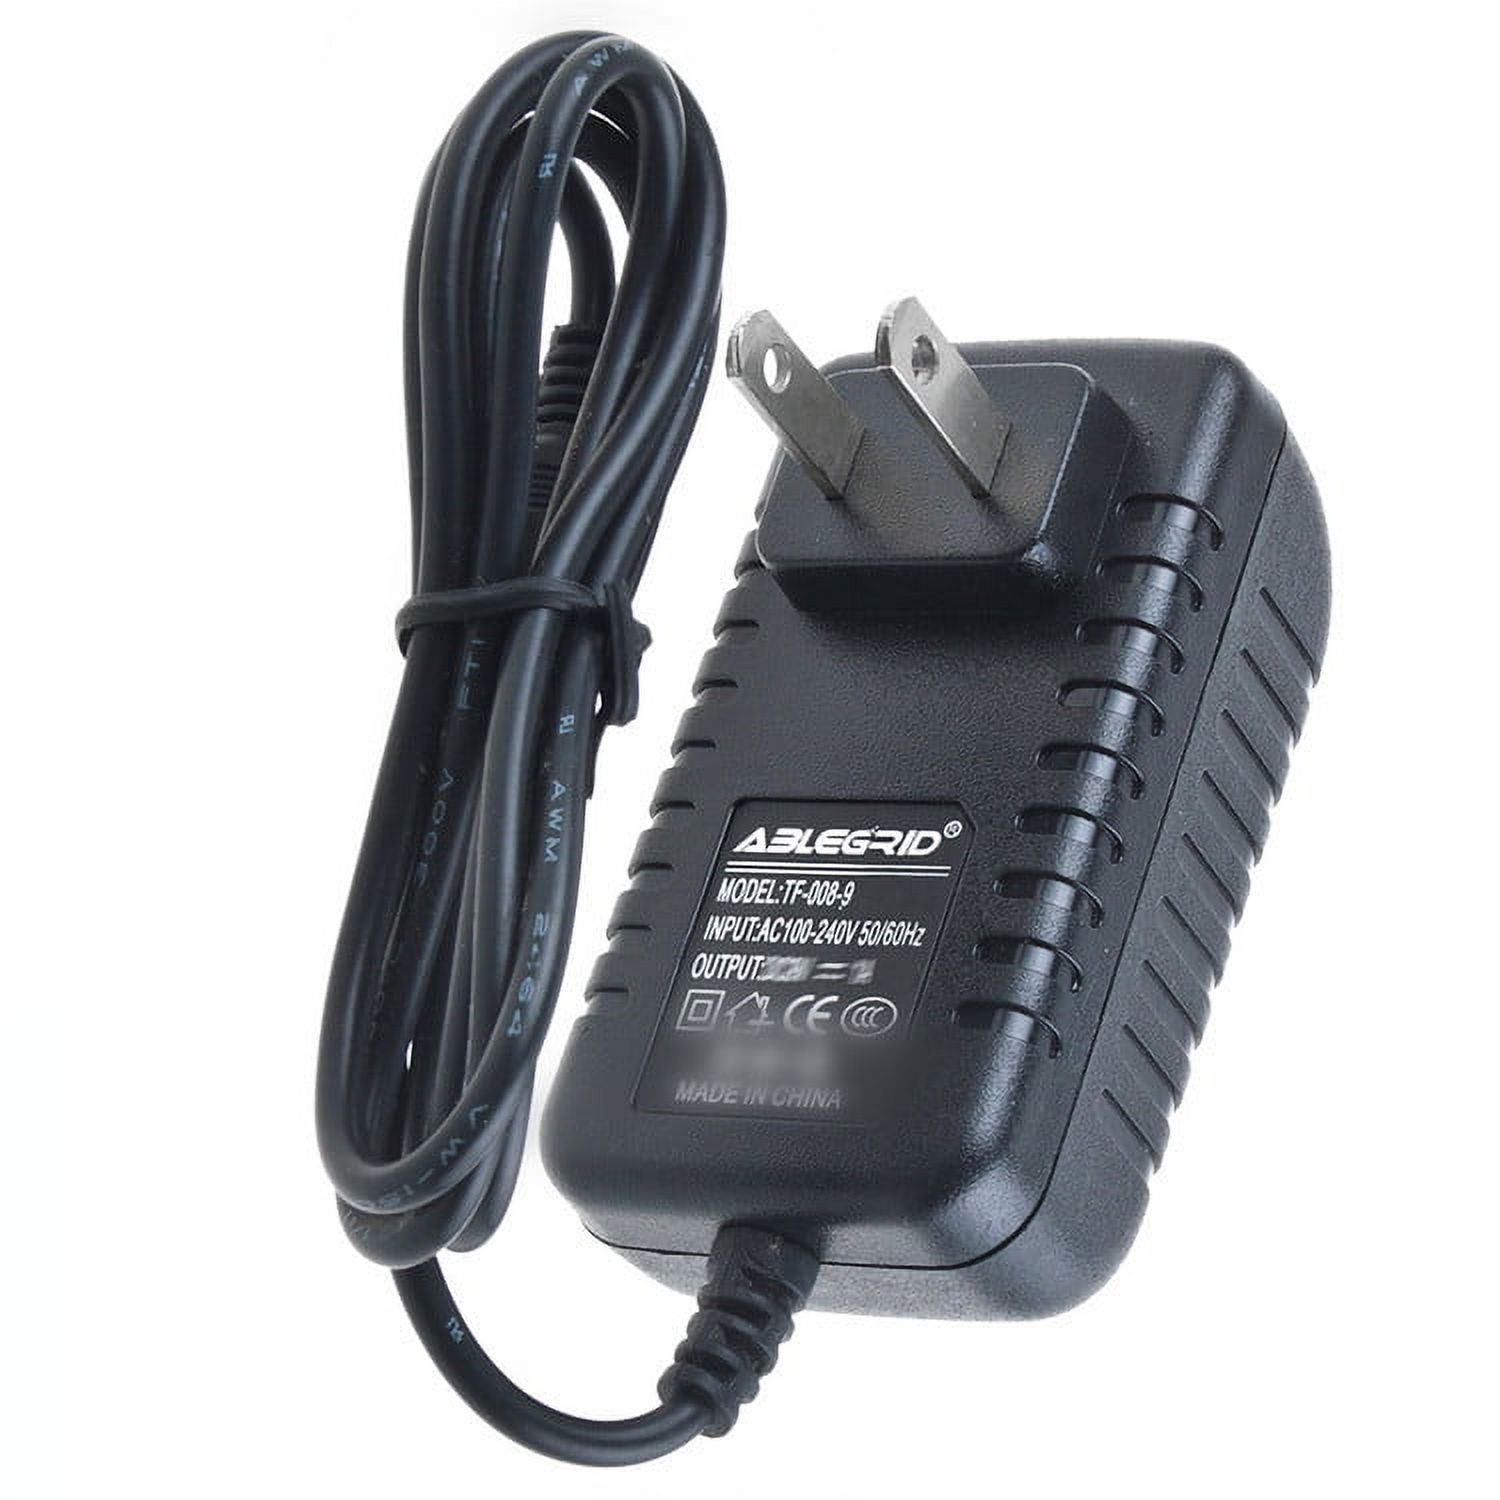 ABLEGRID AC / DC Adapter For JBL YJS020F-1201500D JEMBE WIRELESS Switching Power Supply Cord Cable PS Charger Mains PSU - image 2 of 3